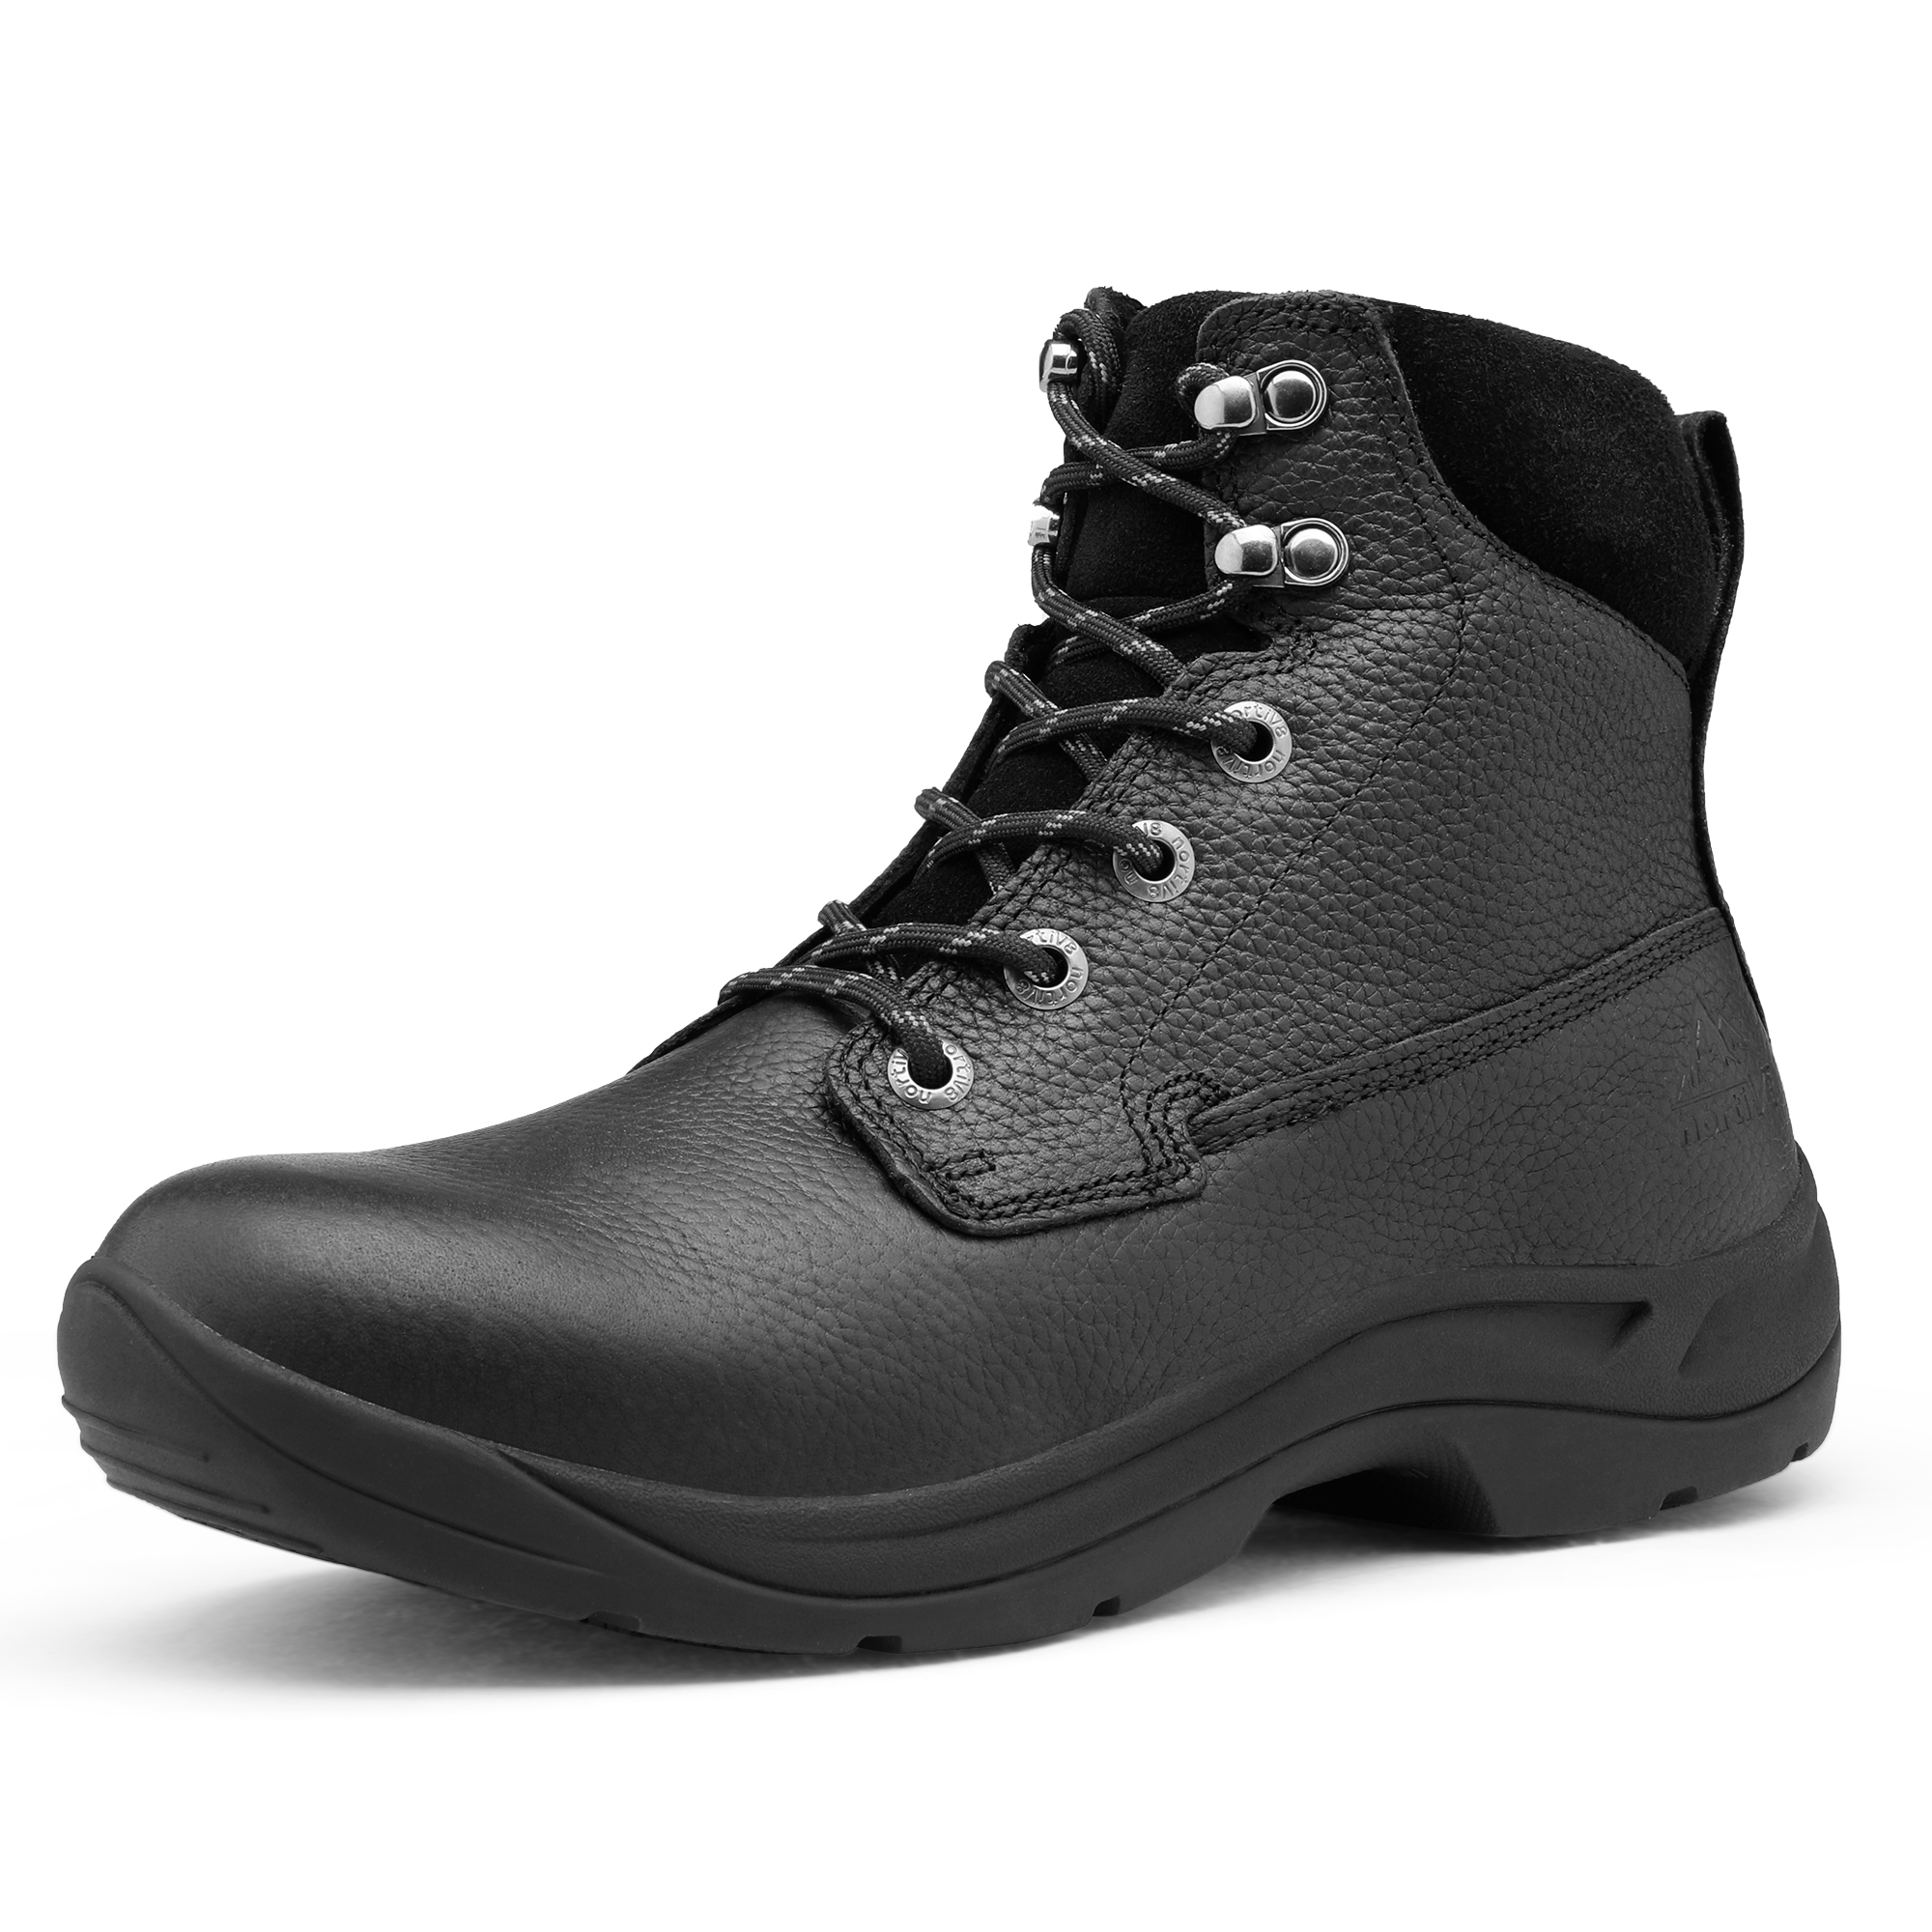 NORTIV 8 Men Military Tactical Boots Shoes Safety Work Boots Combat Army Lightweight Ankle Boots For Men WORKSTEP BLACK/LITCHI Size 8 - image 1 of 6